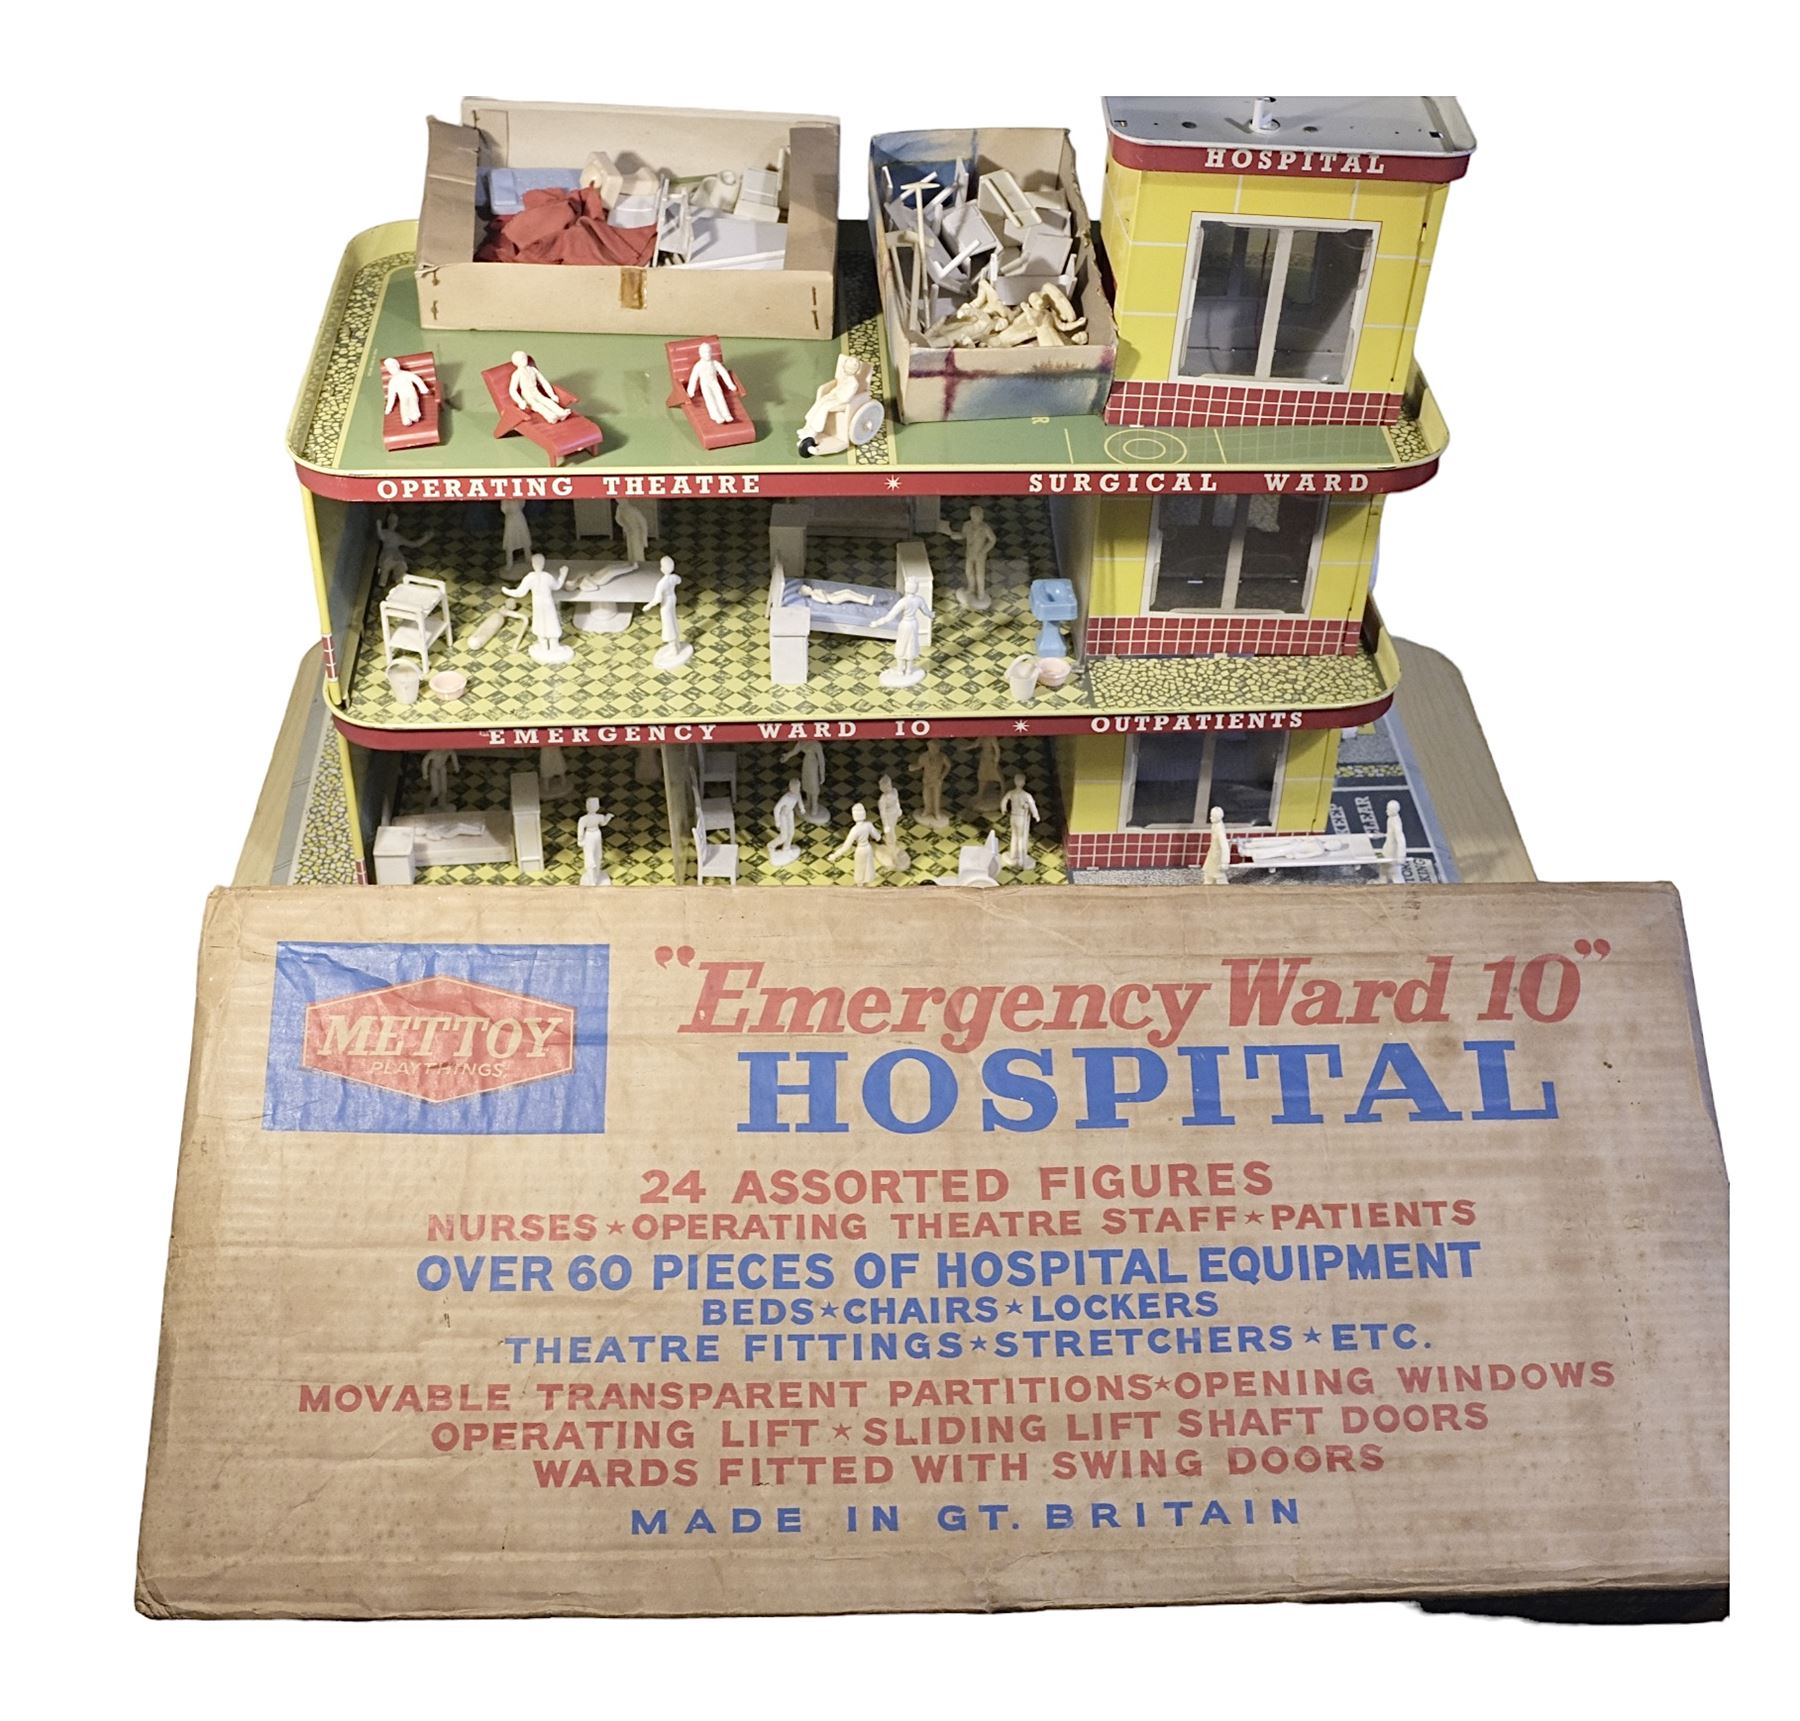 Late 1950s/early 1960s Mettoy tin-plate Emergency Ward 10 hospital set from the TV series